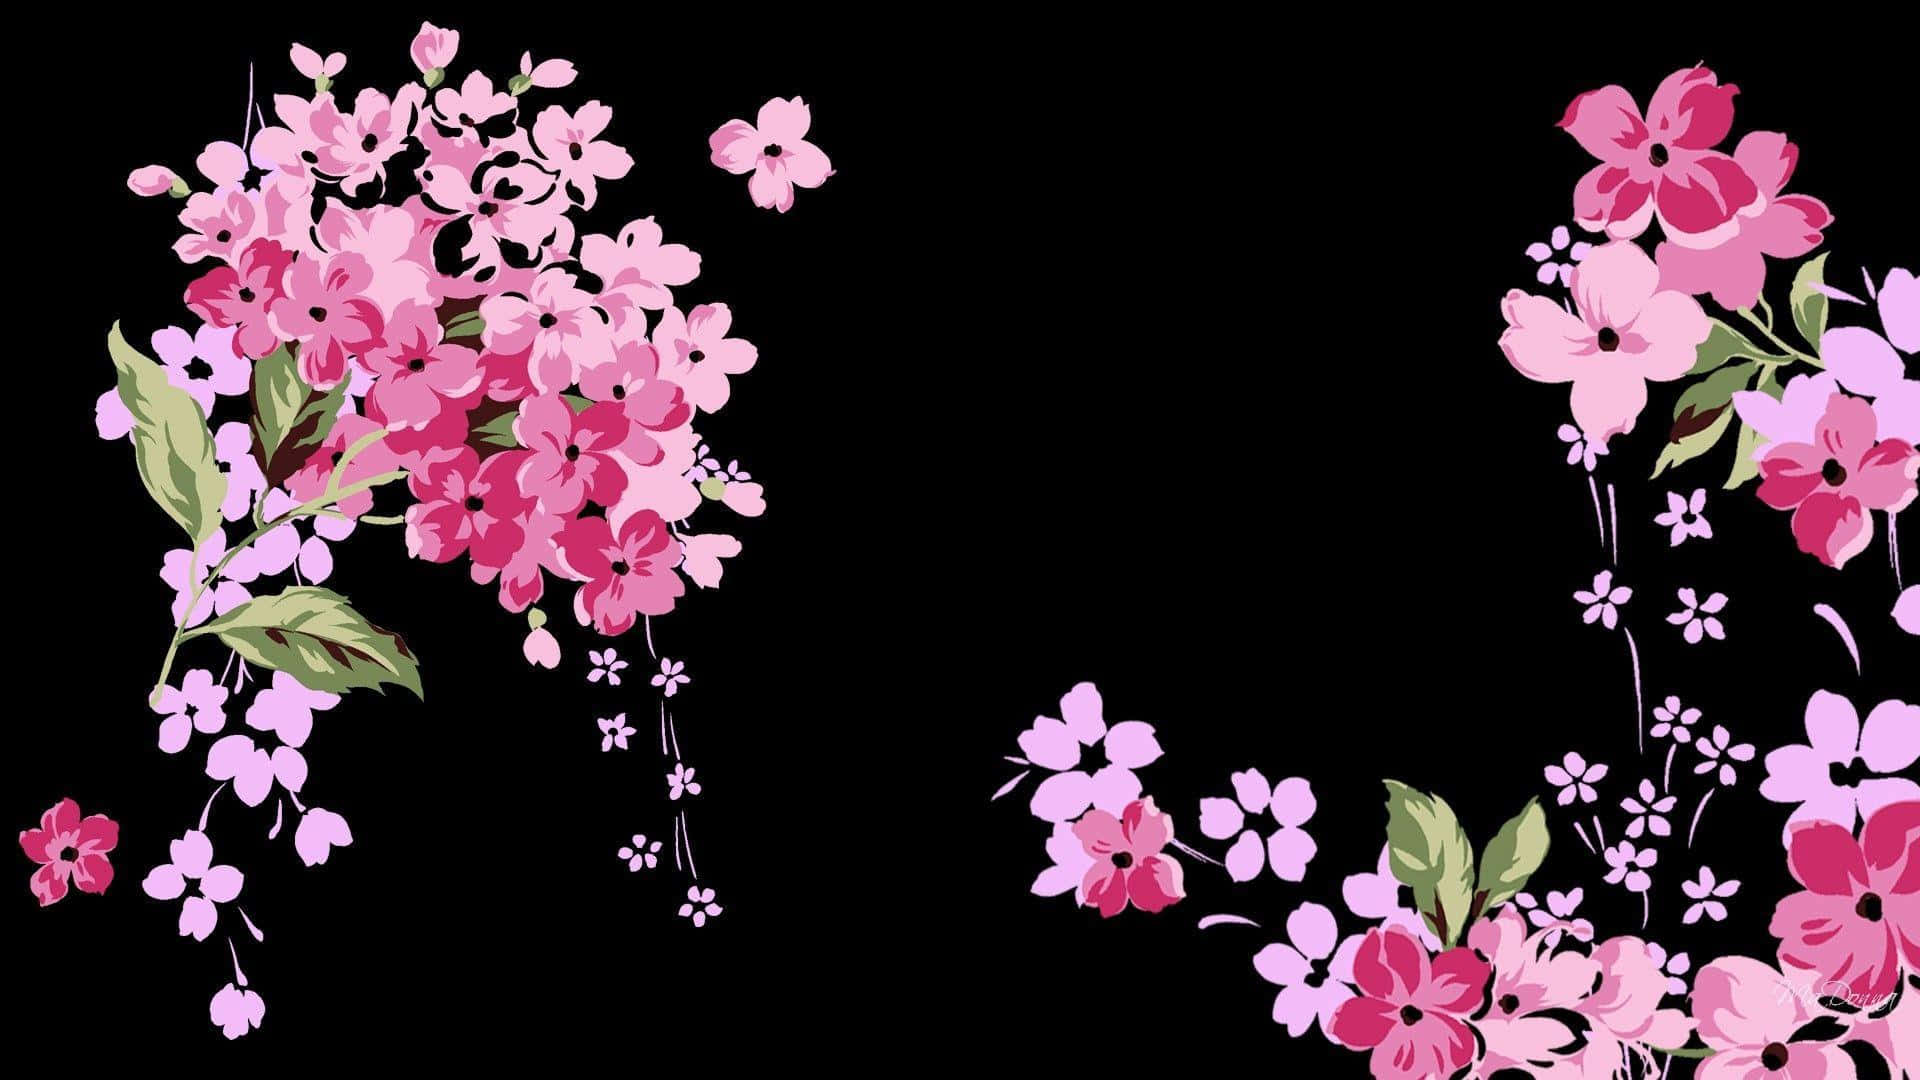 A Black Background With Pink Flowers On It